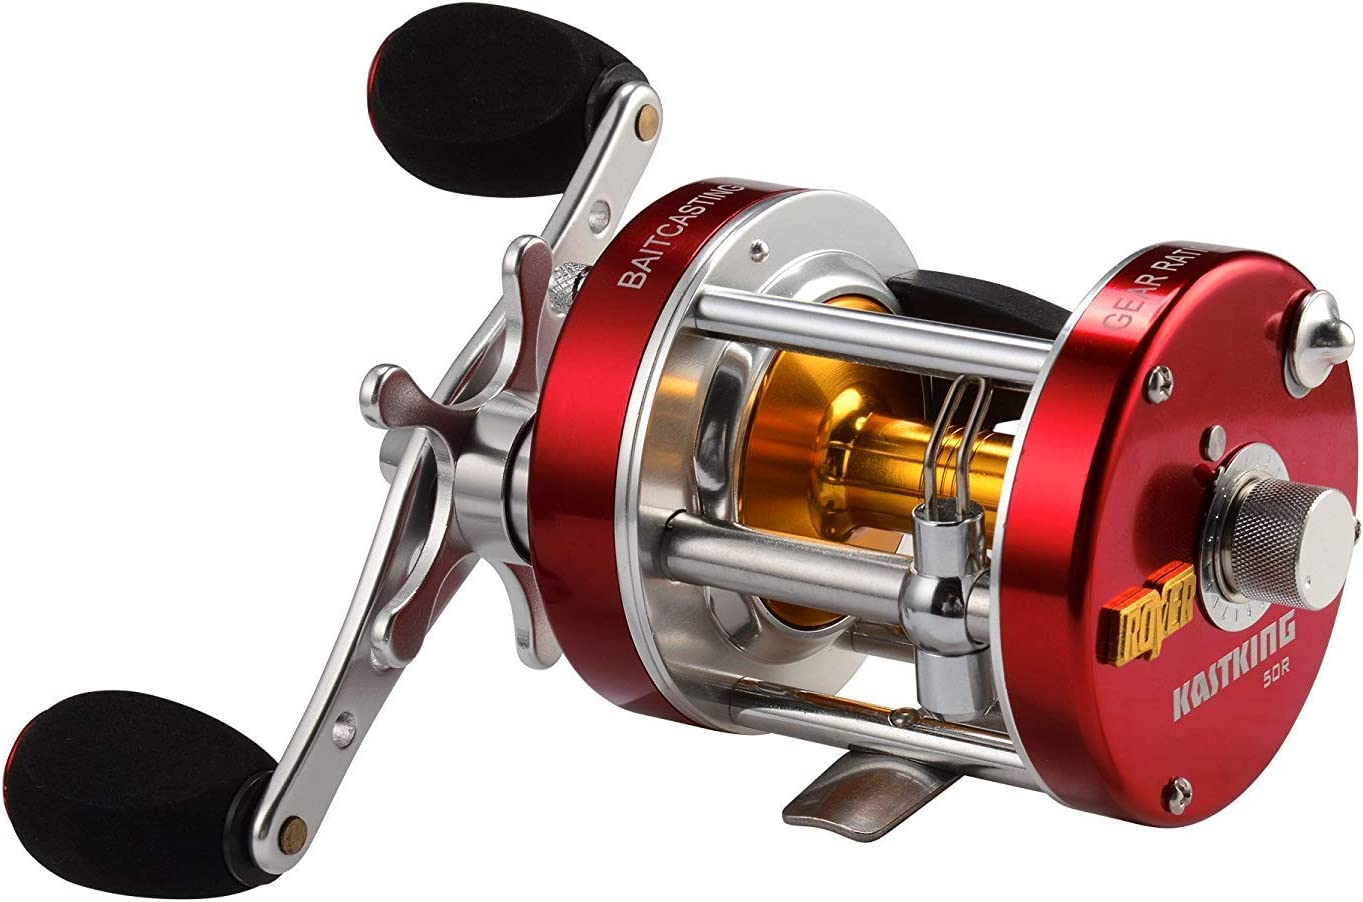 KastKing Rover Baitcasting Reel - Best Round Baitcaster For Conventional Fishing